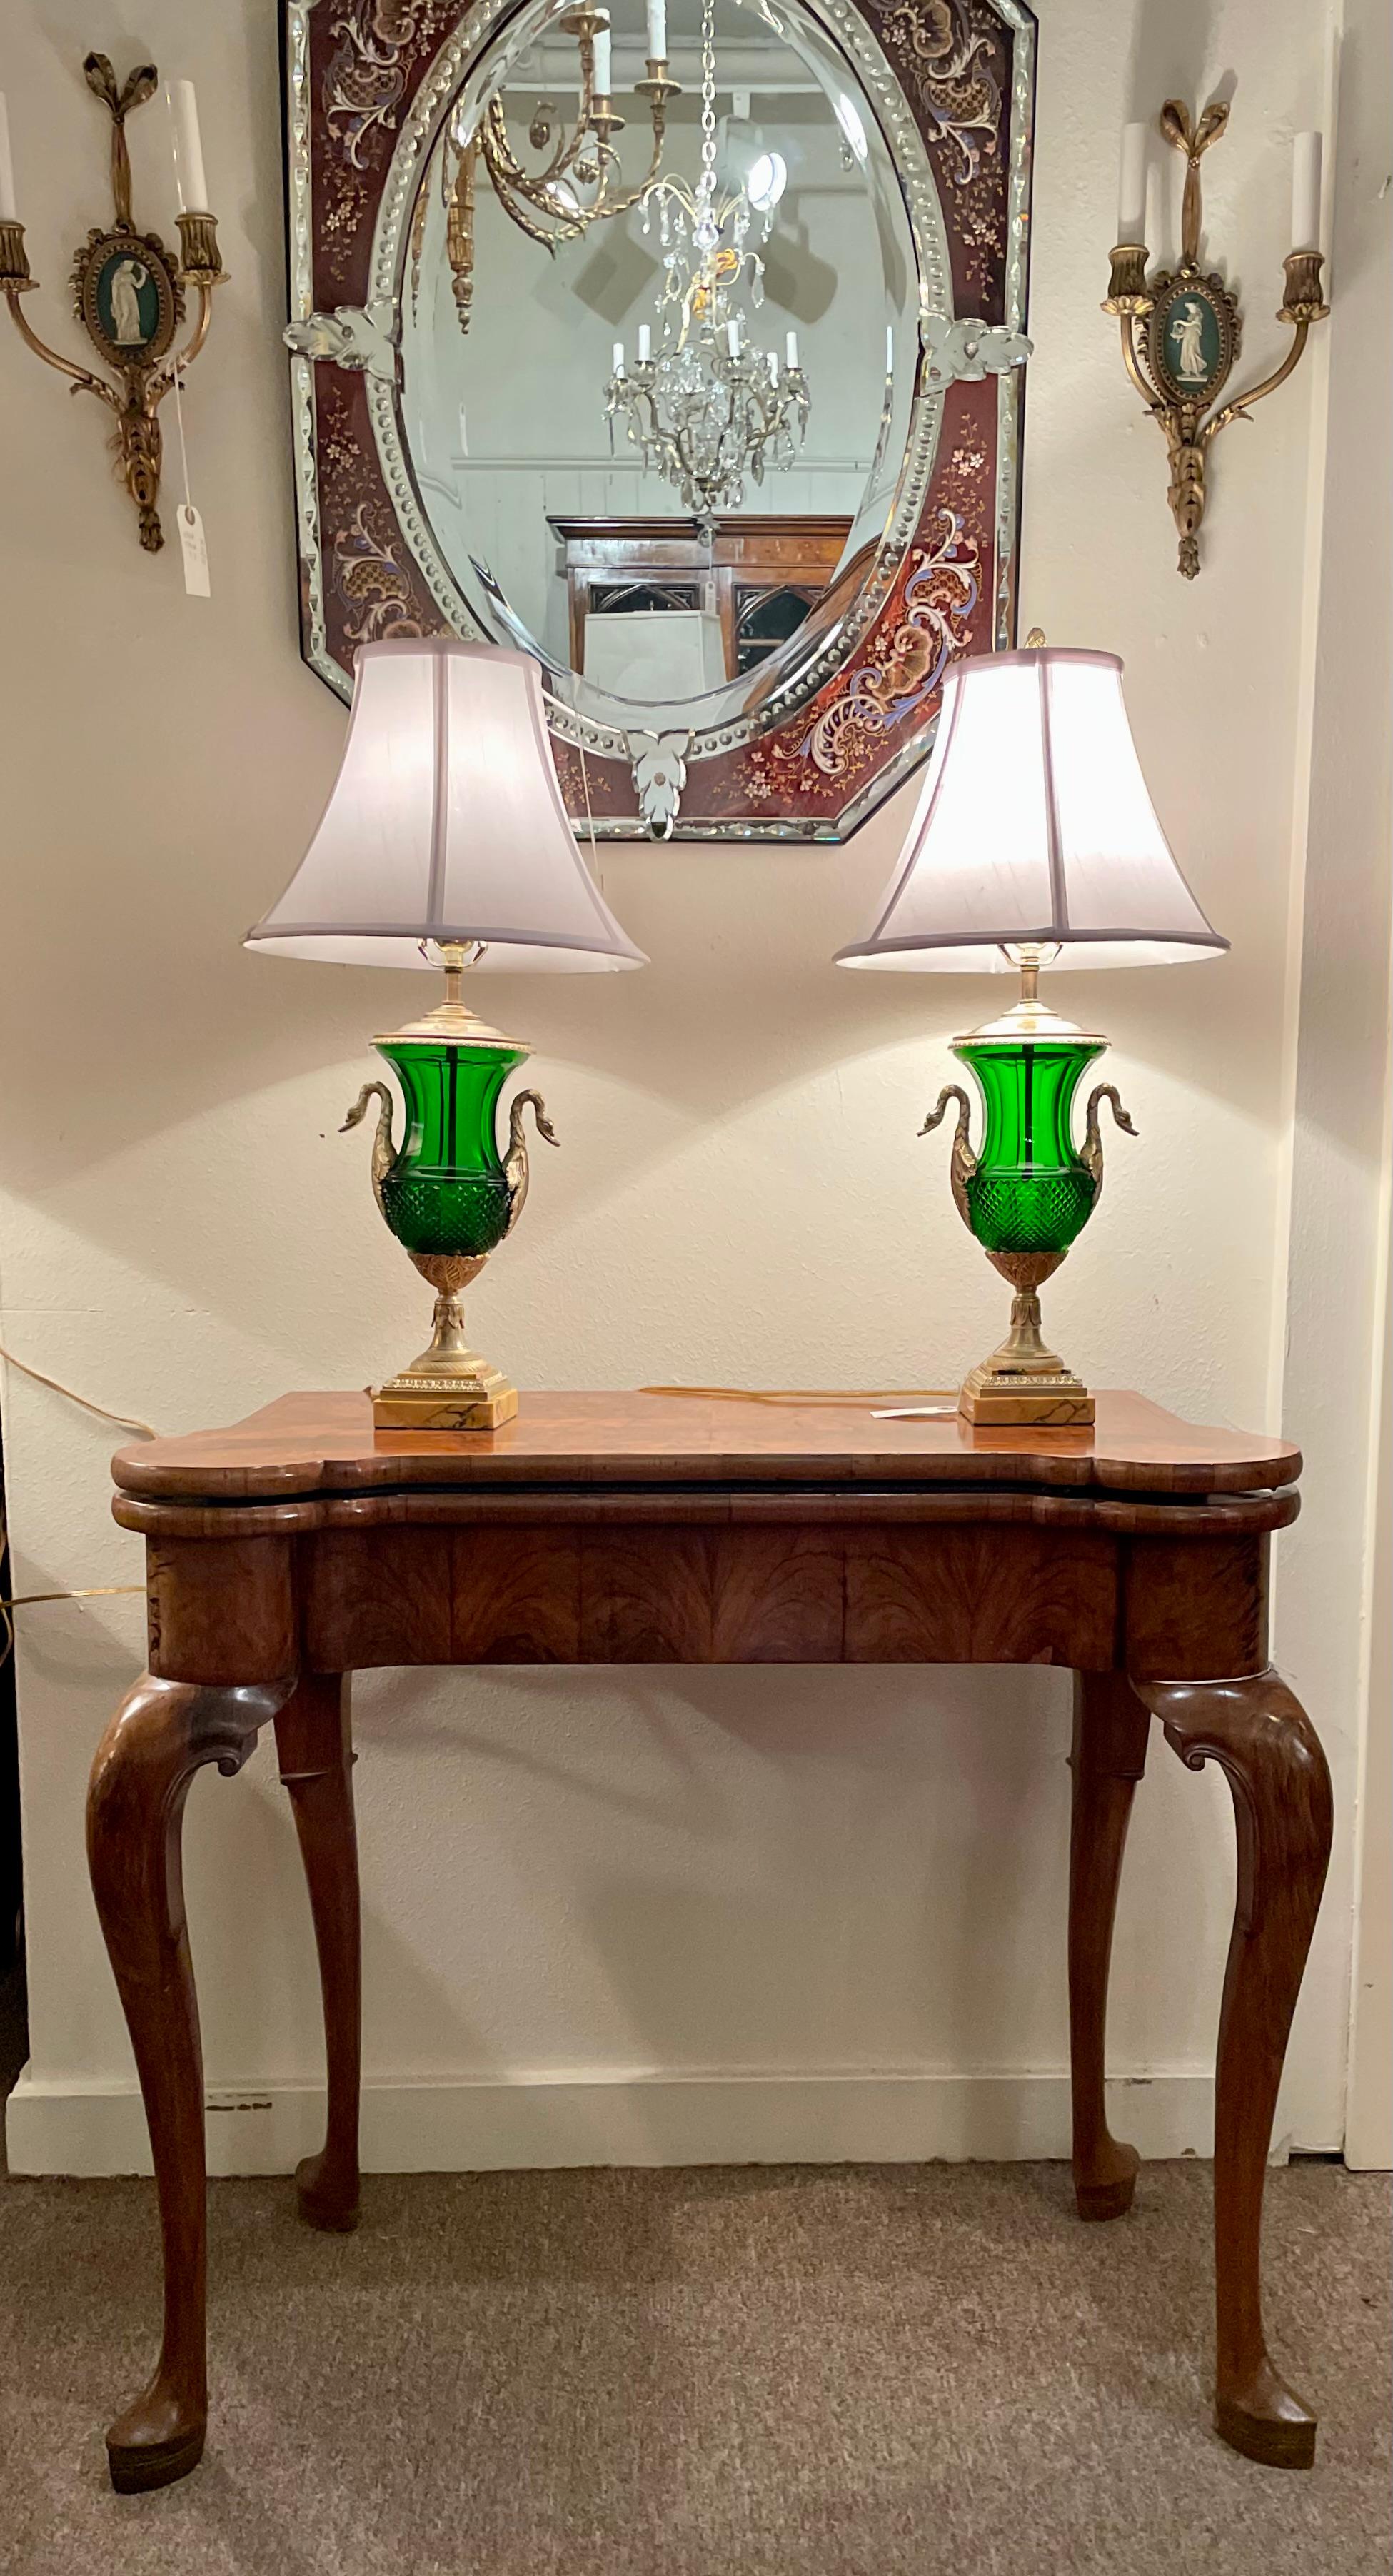 Pair Antique French Emerald Colored Baccarat Crystal & Gold Bronze Lamps, c 1890 For Sale 1